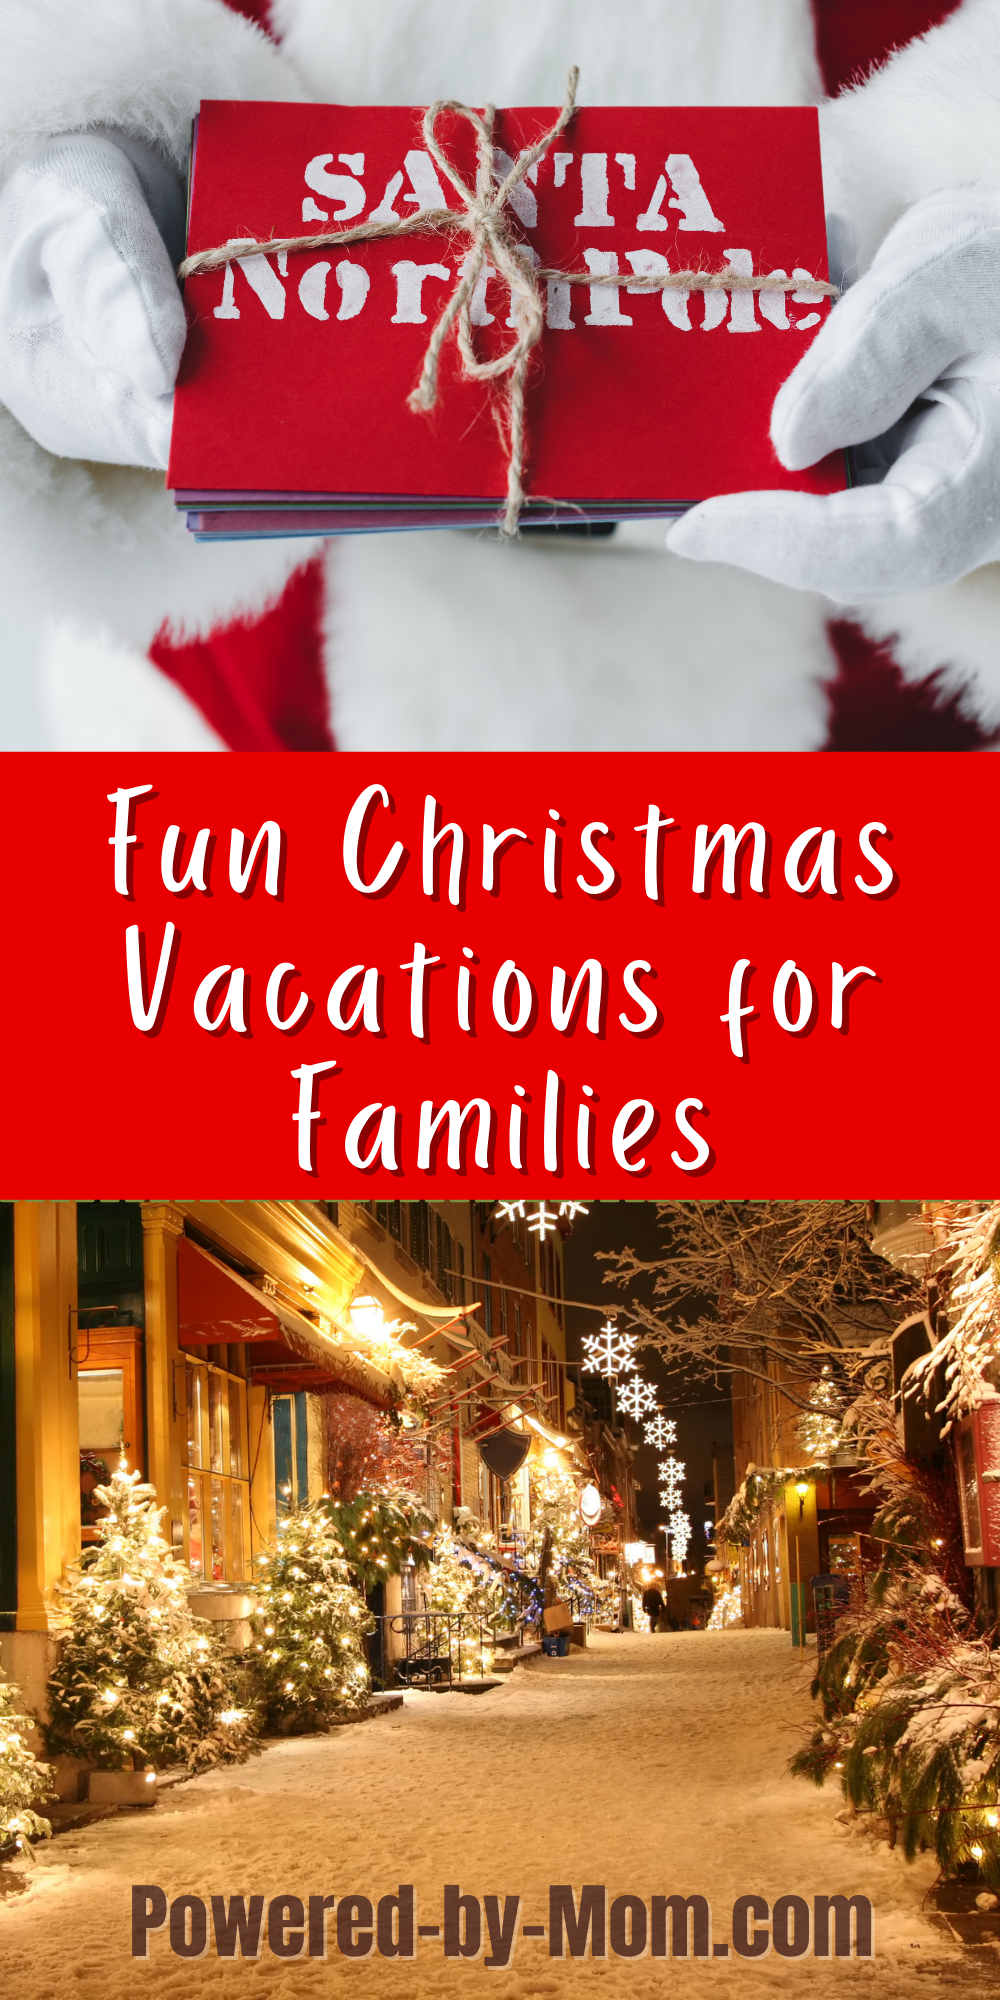 Looking for ways to create some fun memories without breaking the bank? Check out our favorite spots for Christmas vacations for families.